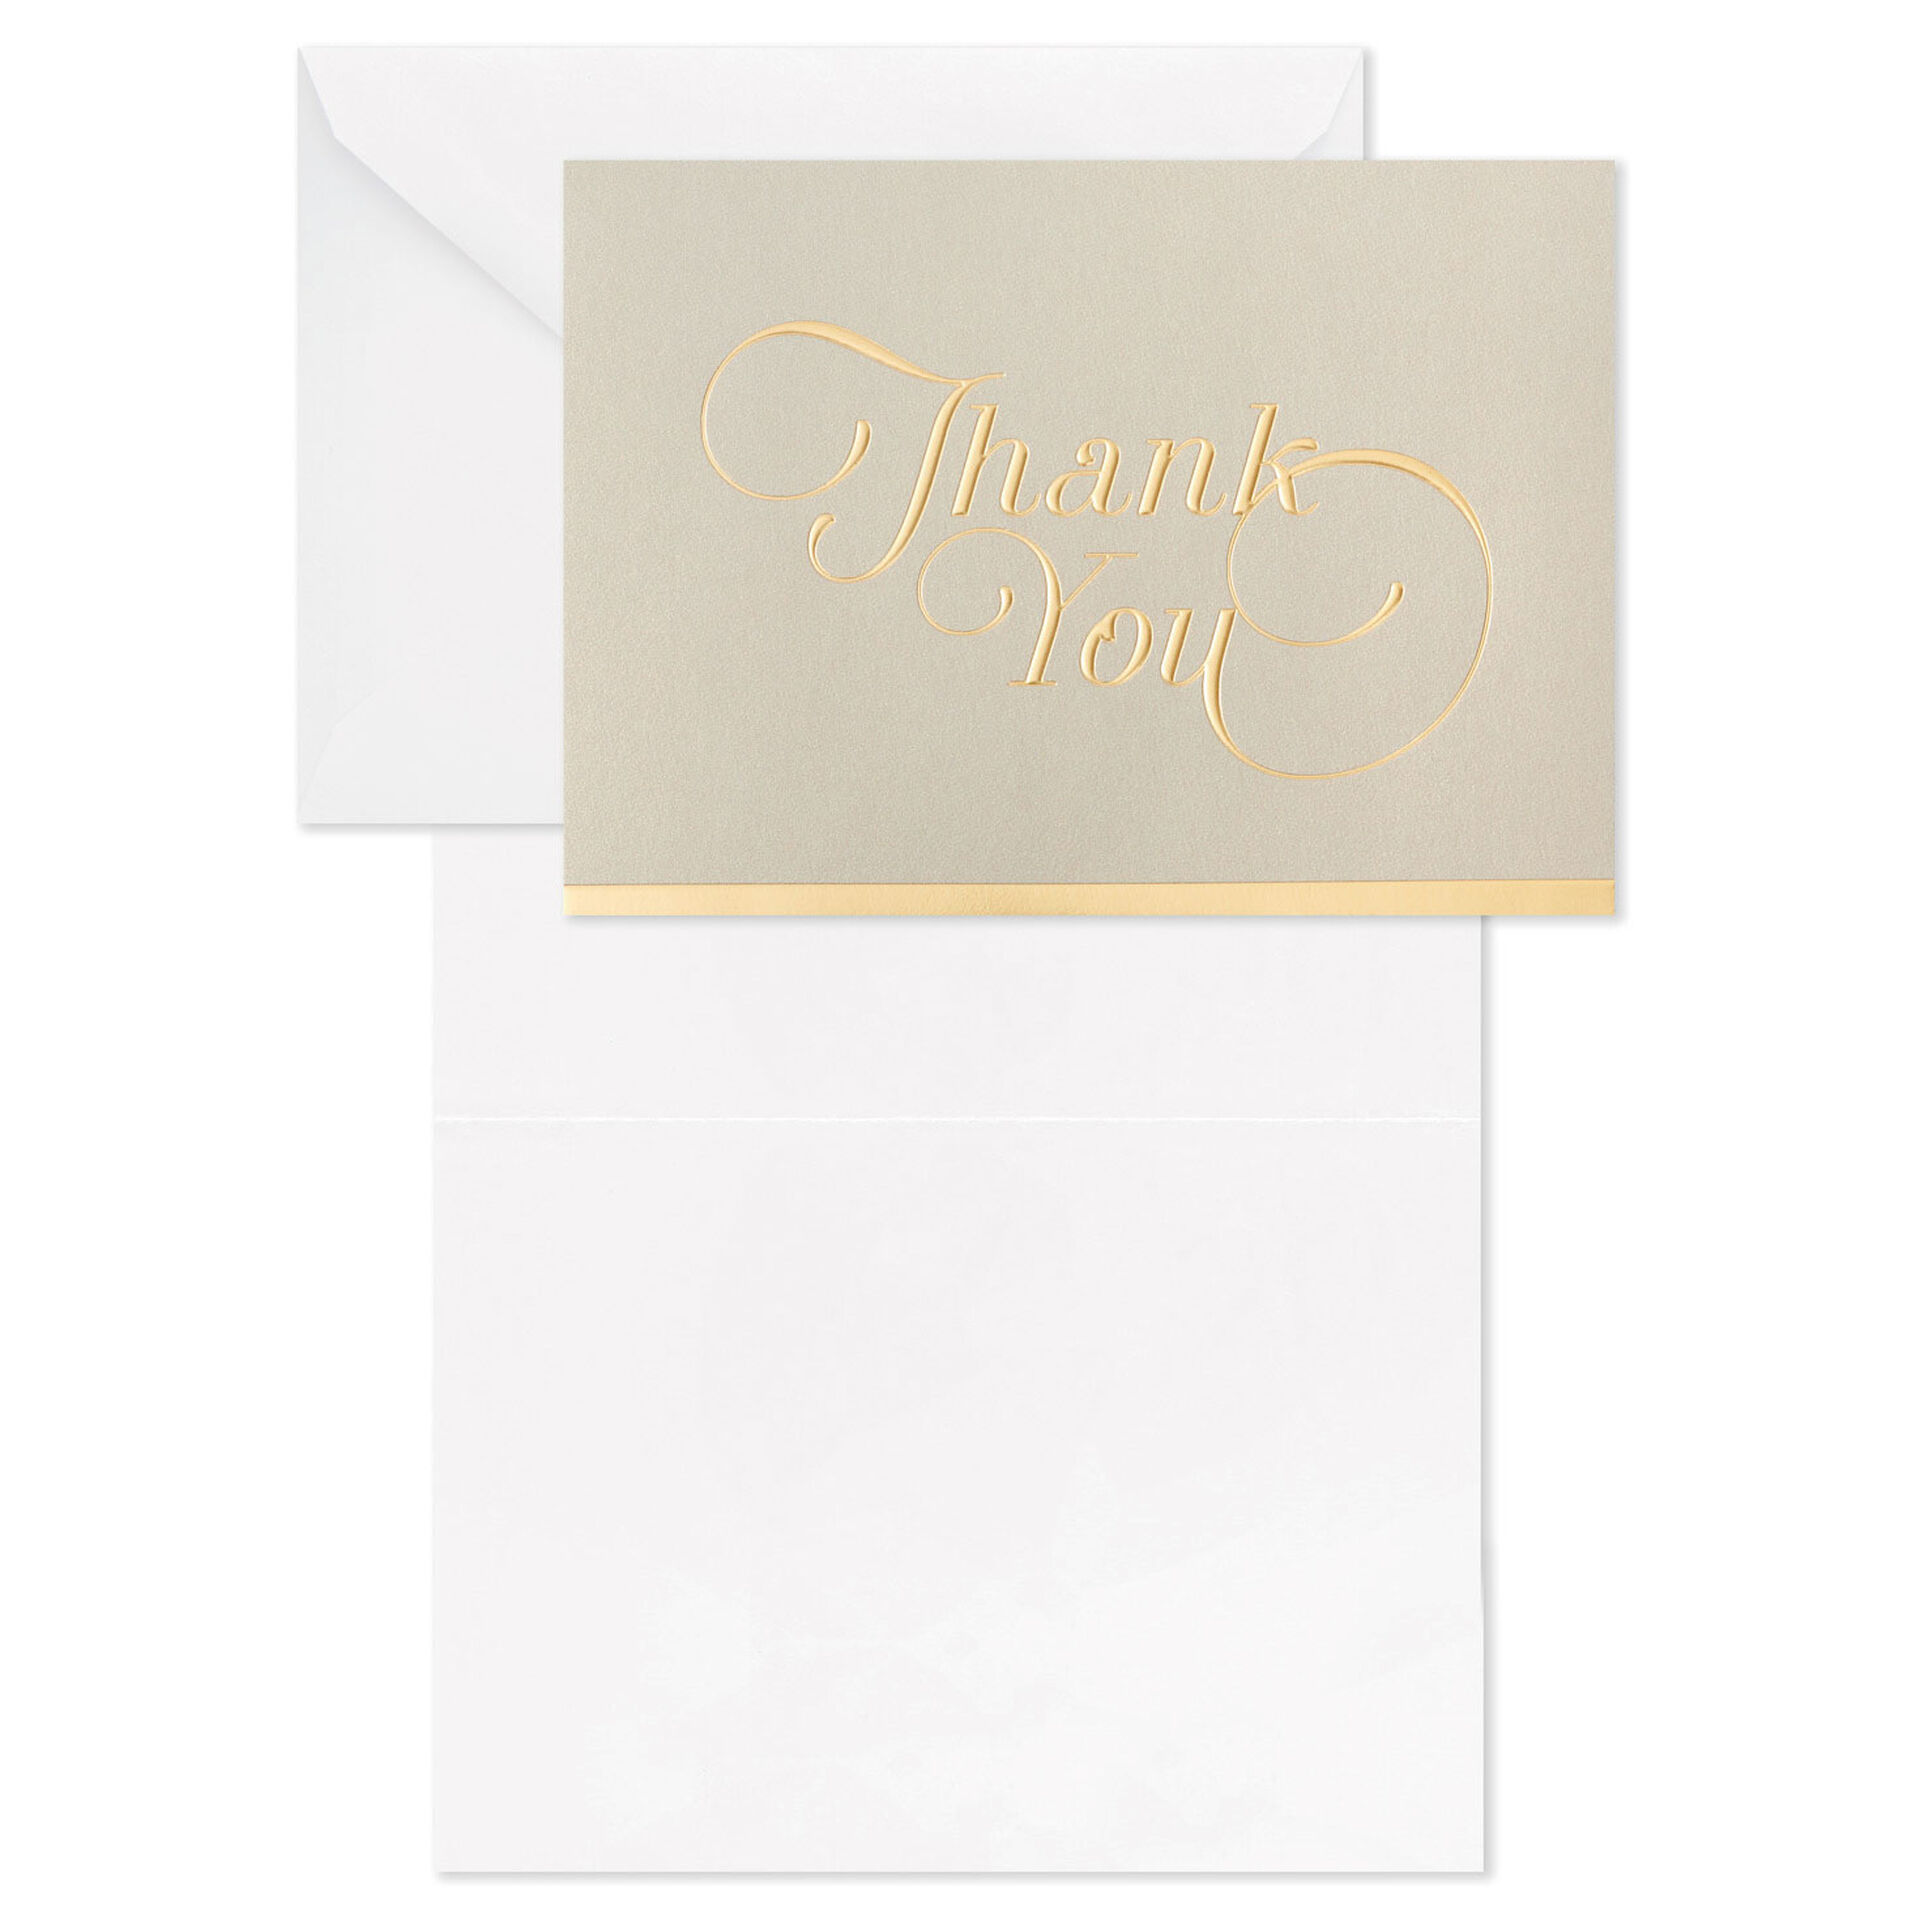 Gray-and-Gold-Bulk-Blank-ThankYou-Notes-Multipack_3THK2522_03